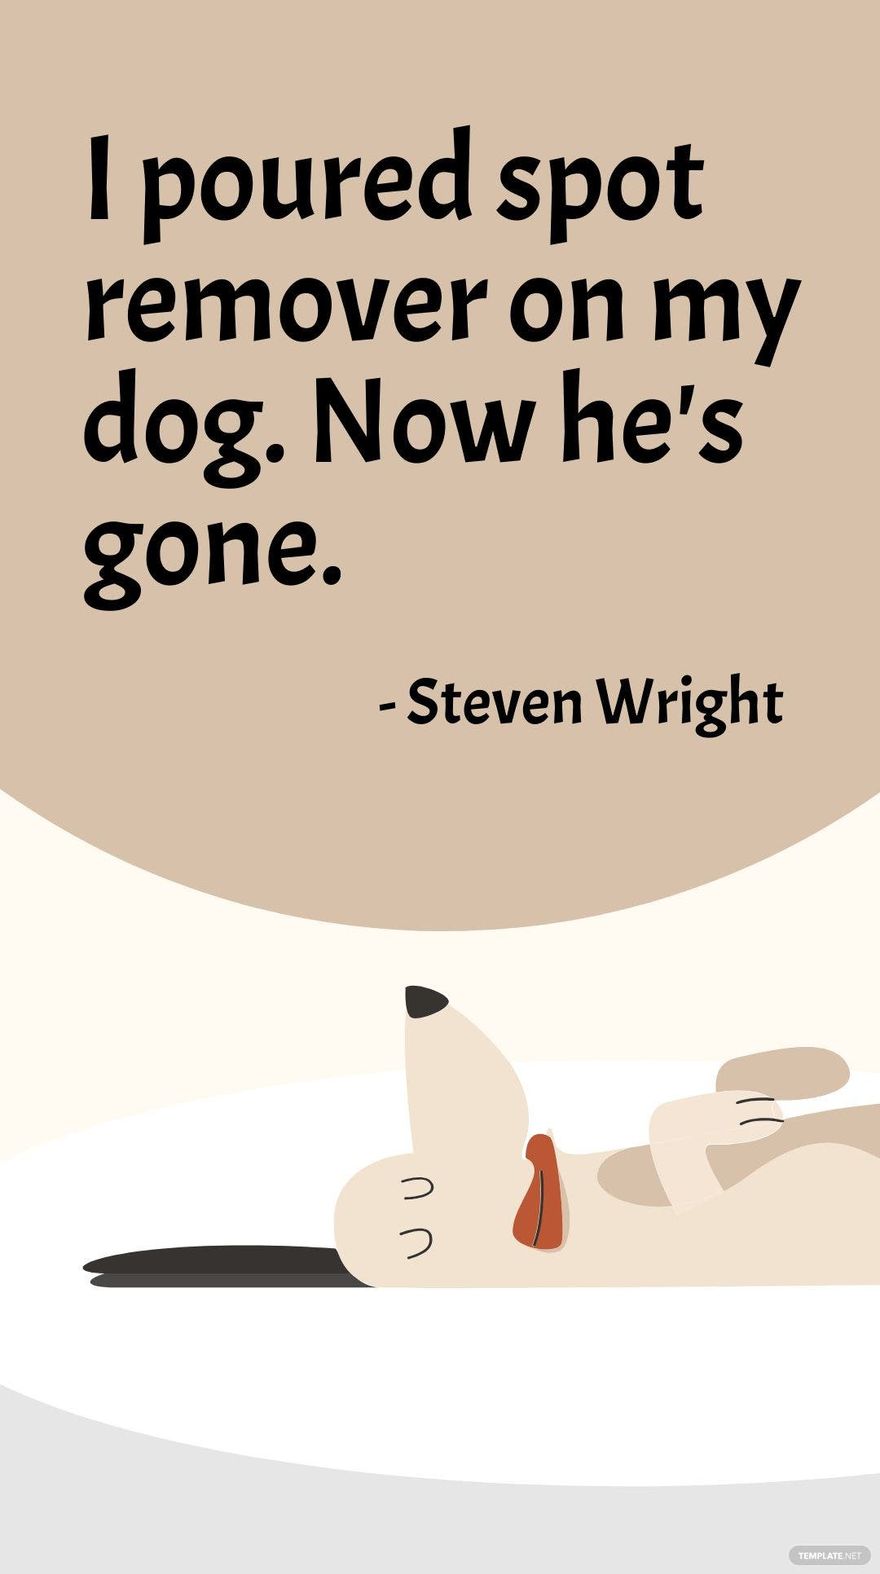 Steven Wright - I poured spot remover on my dog. Now he's gone. in JPG